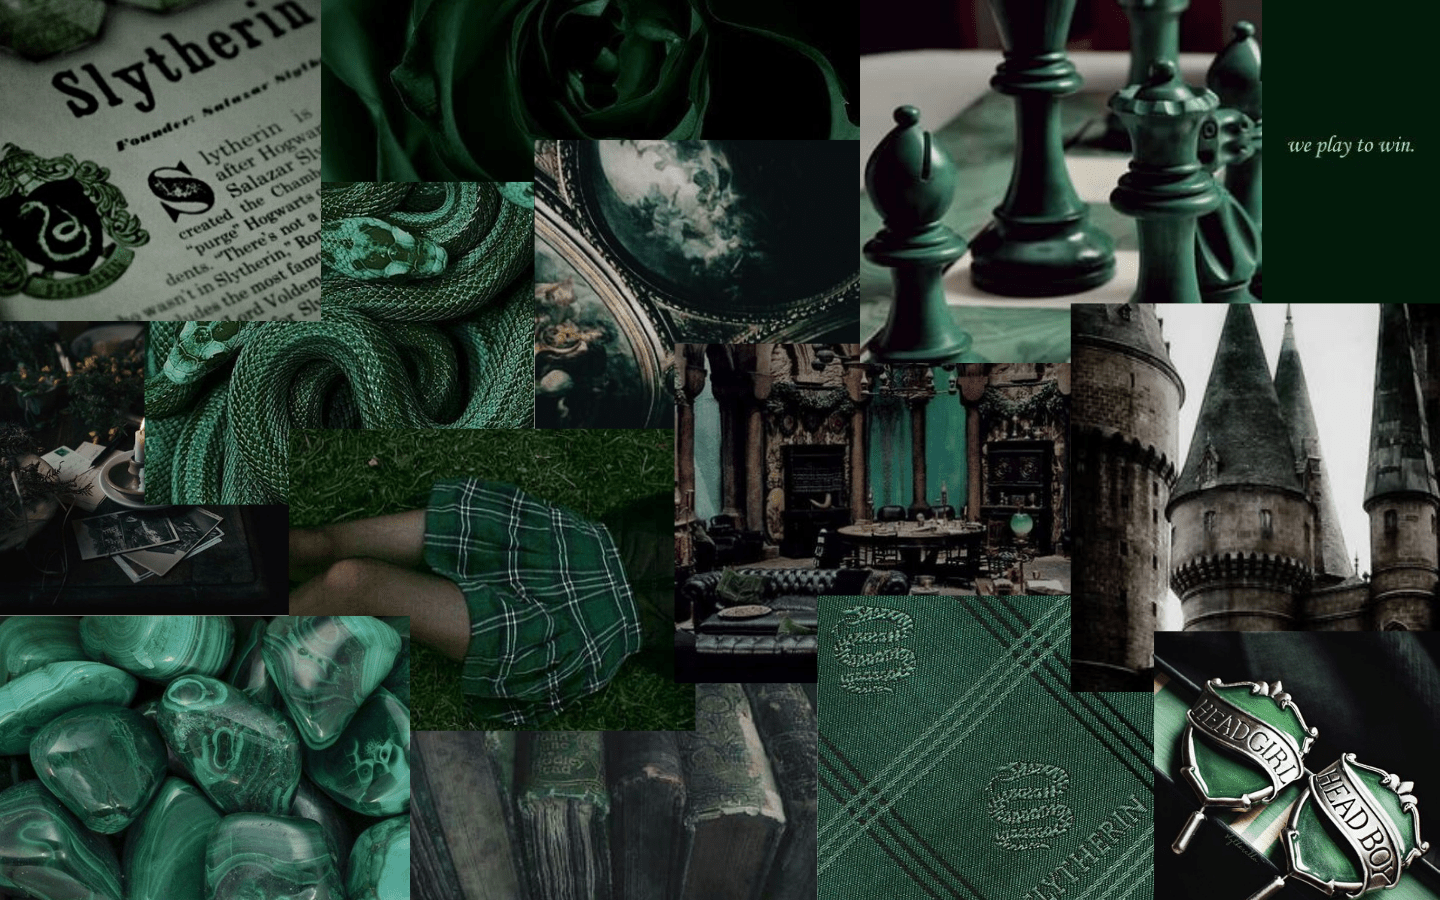 Collage of images related to the Harry Potter series, specifically the house of Slytherin. - Slytherin